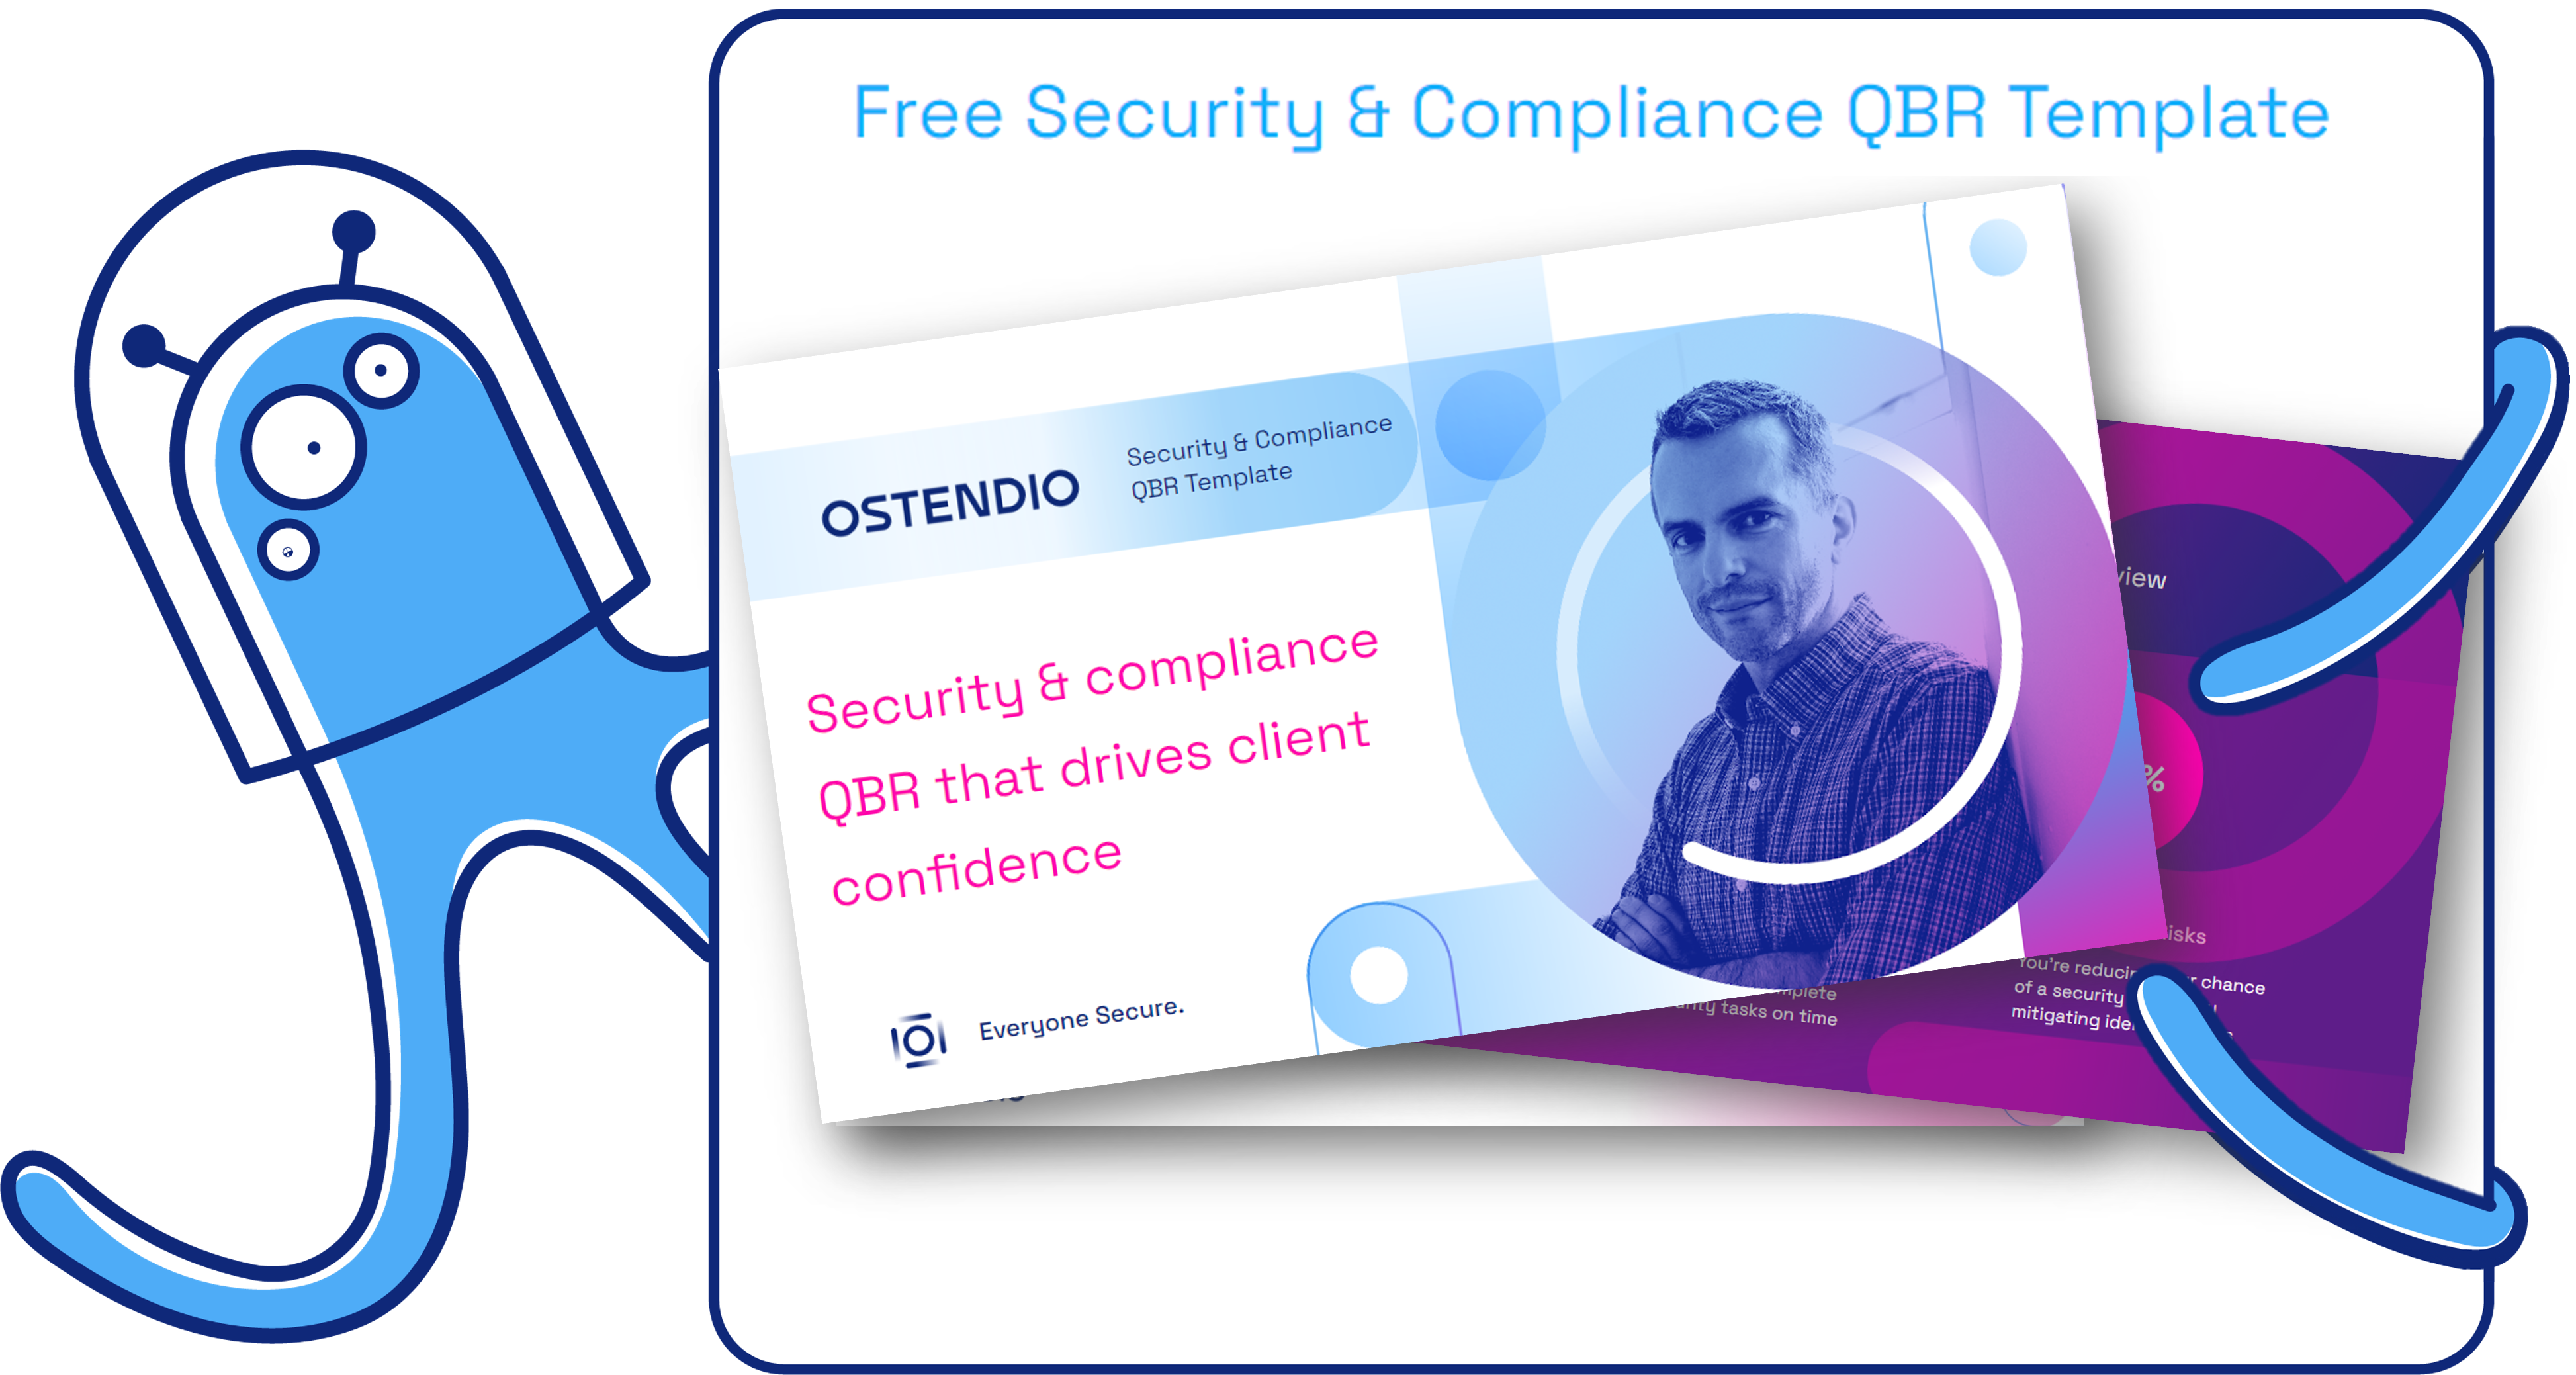 Free Security + Compliance QBR Template